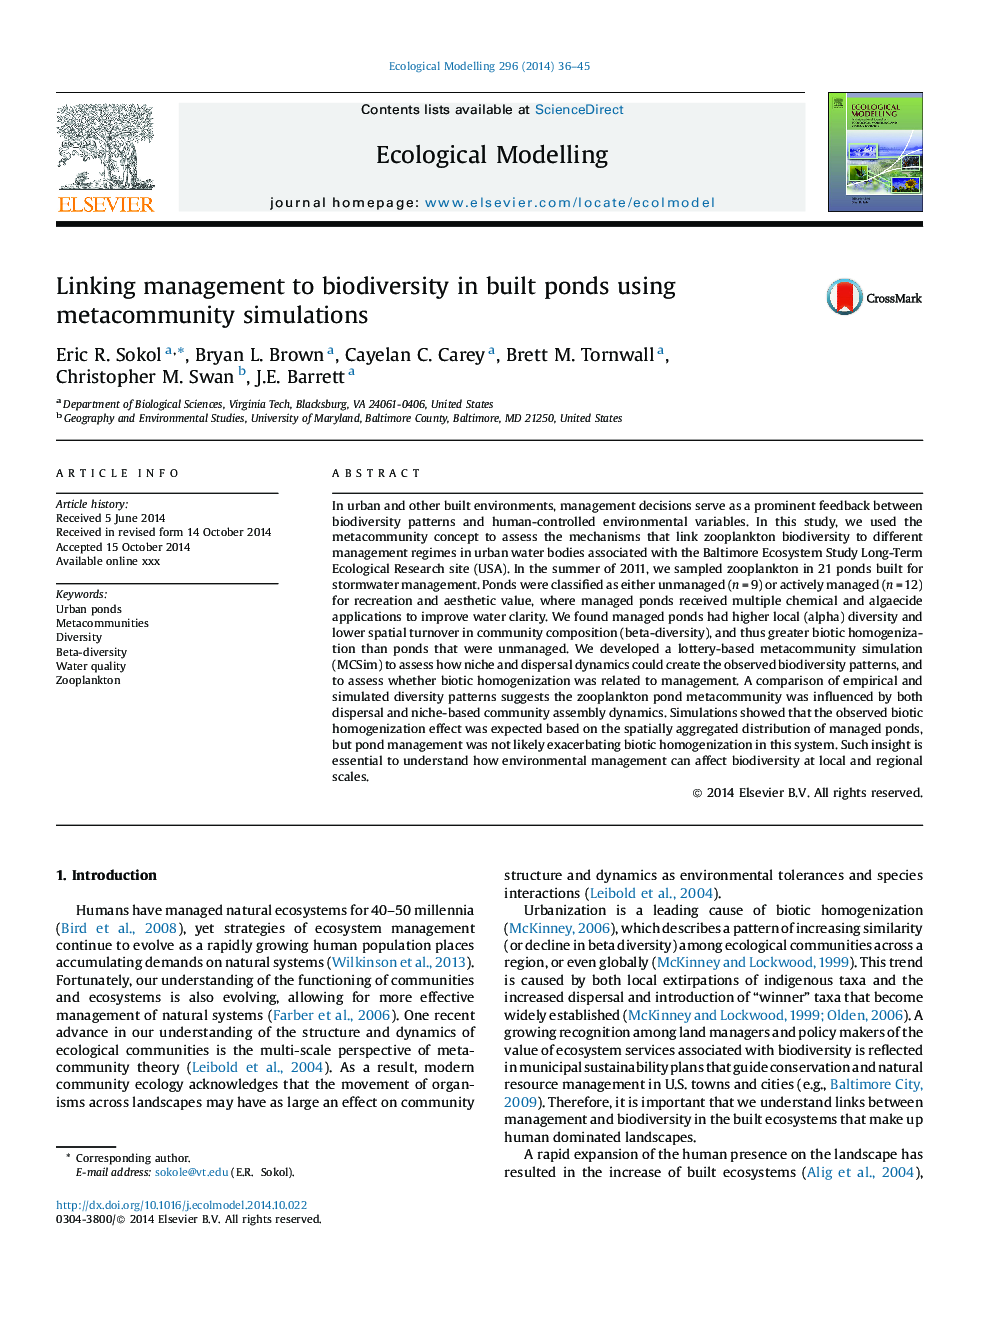 Linking management to biodiversity in built ponds using metacommunity simulations